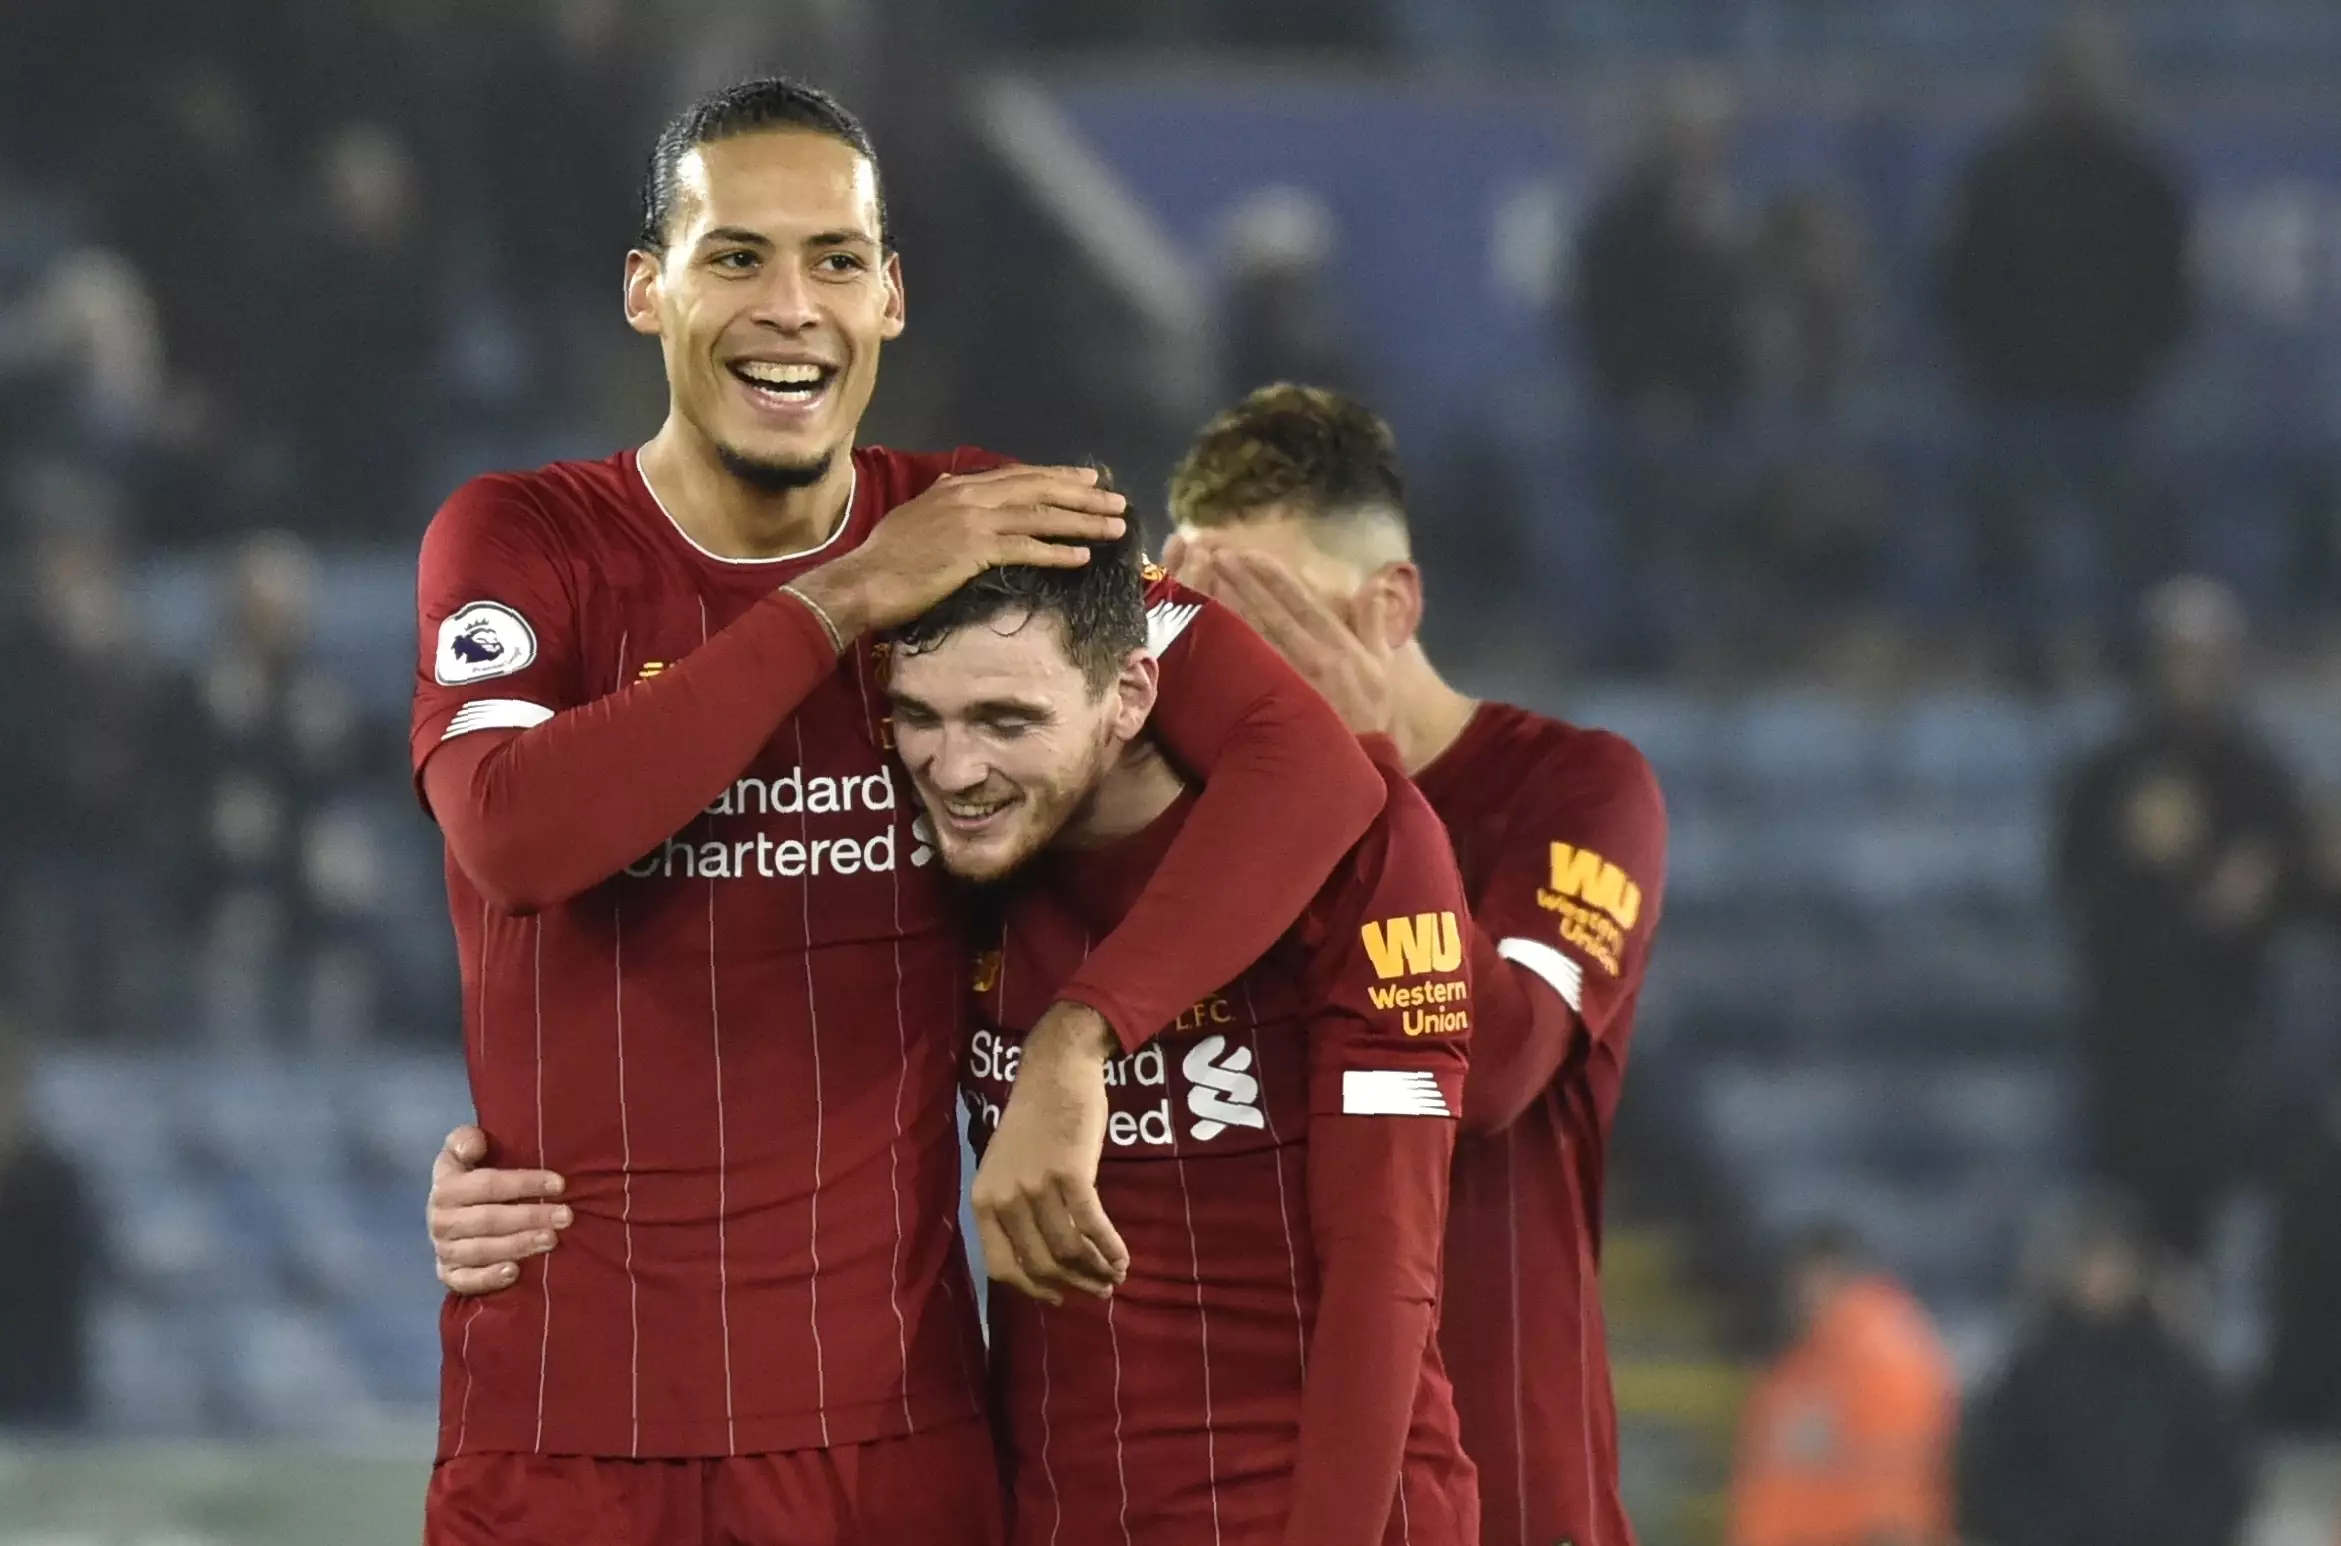 Virgil van Dijk and Andy Robertson rounded out the top five in the list